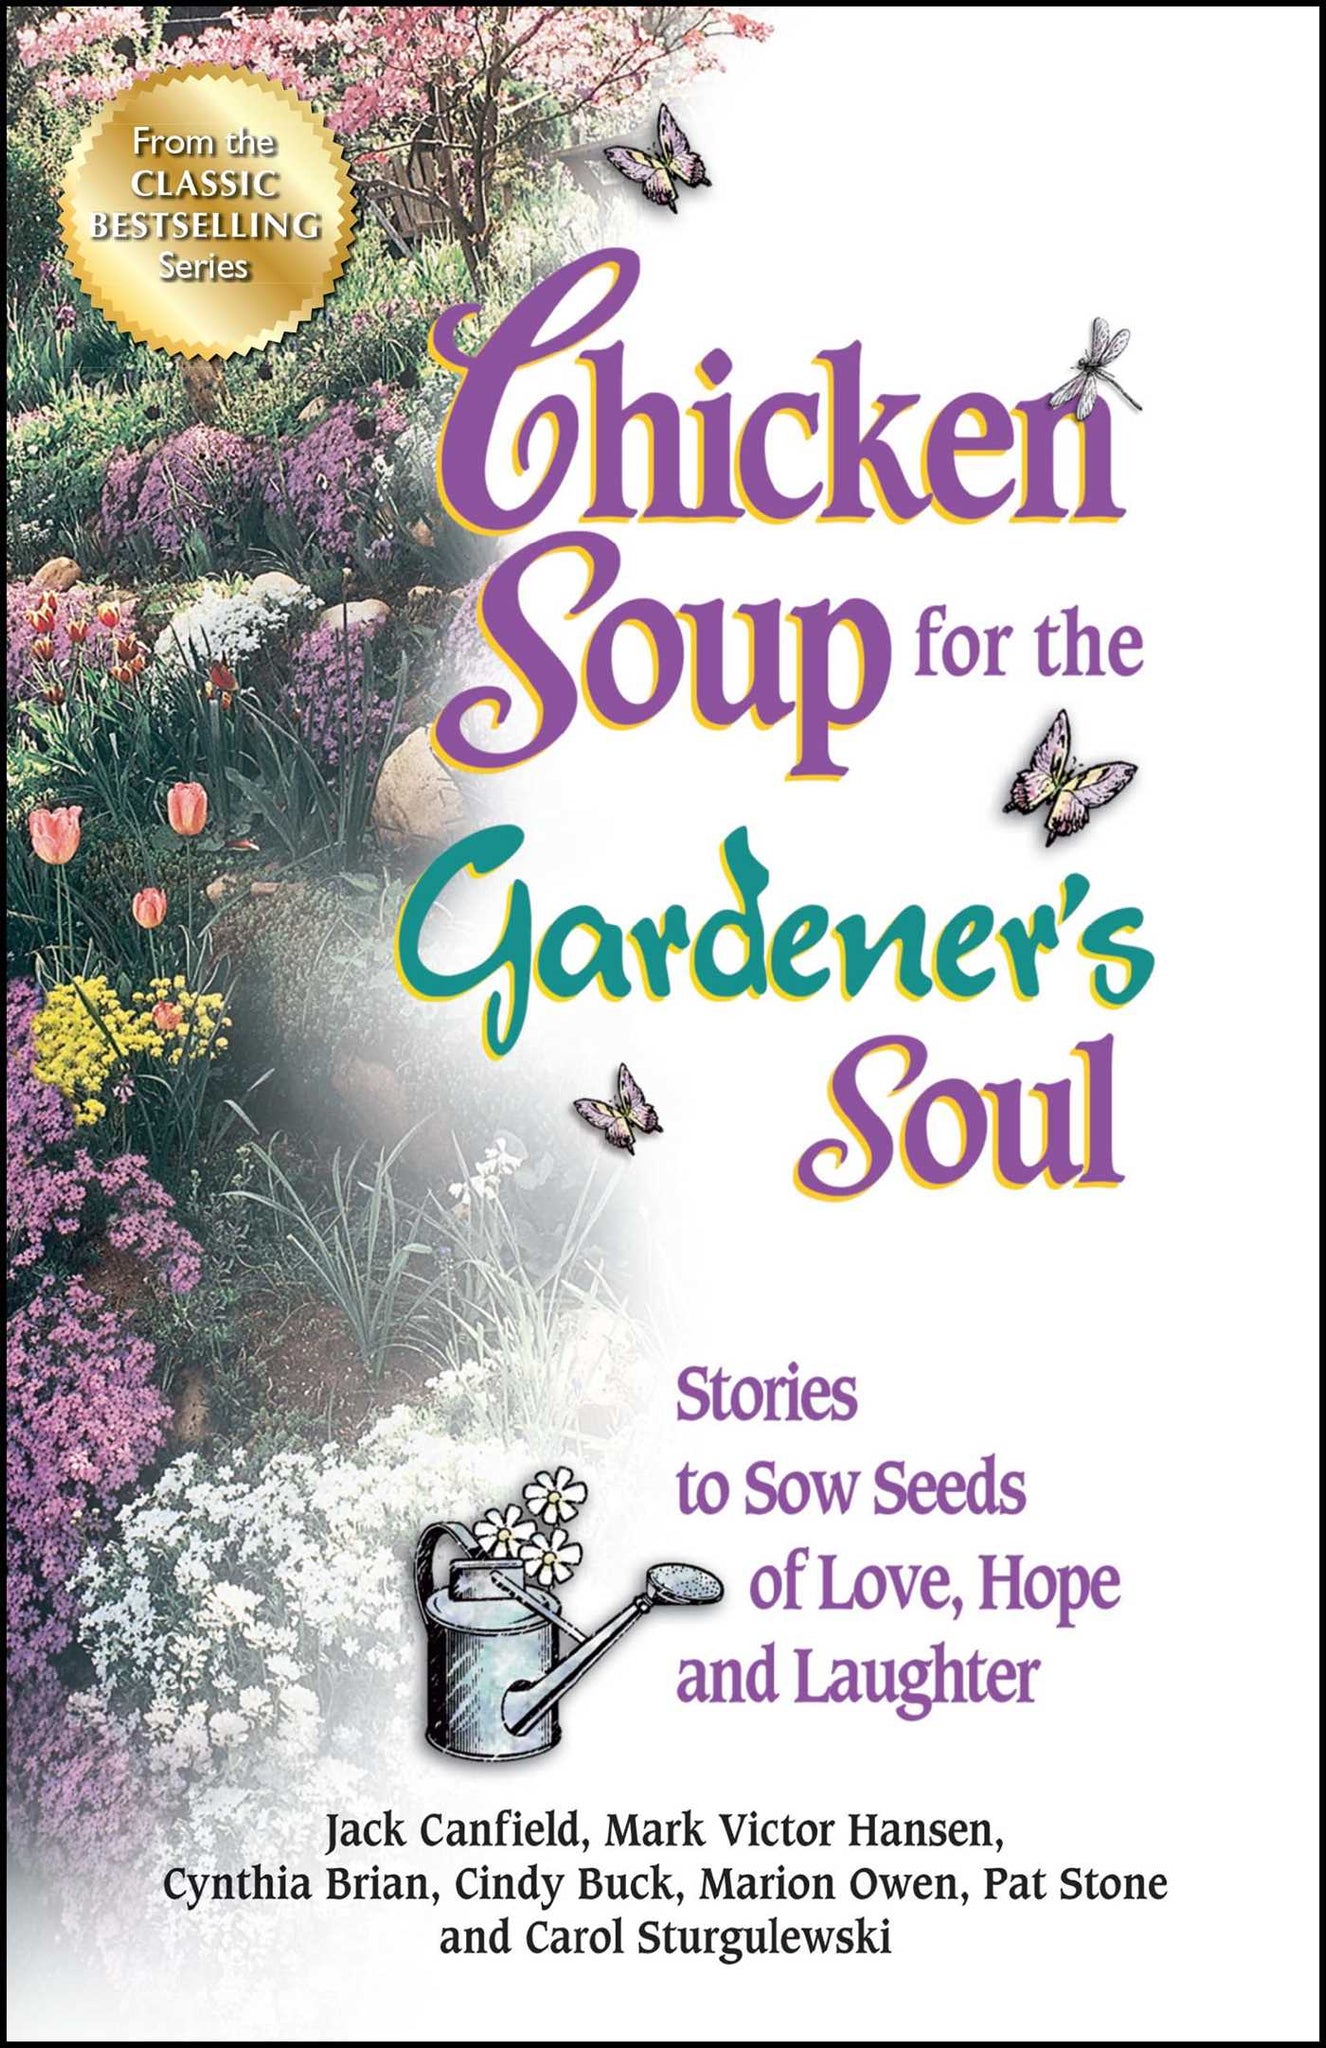 Chicken Soup for the Gardener's Soul : Stories to Sow Seeds of Love, Hope and Laughter